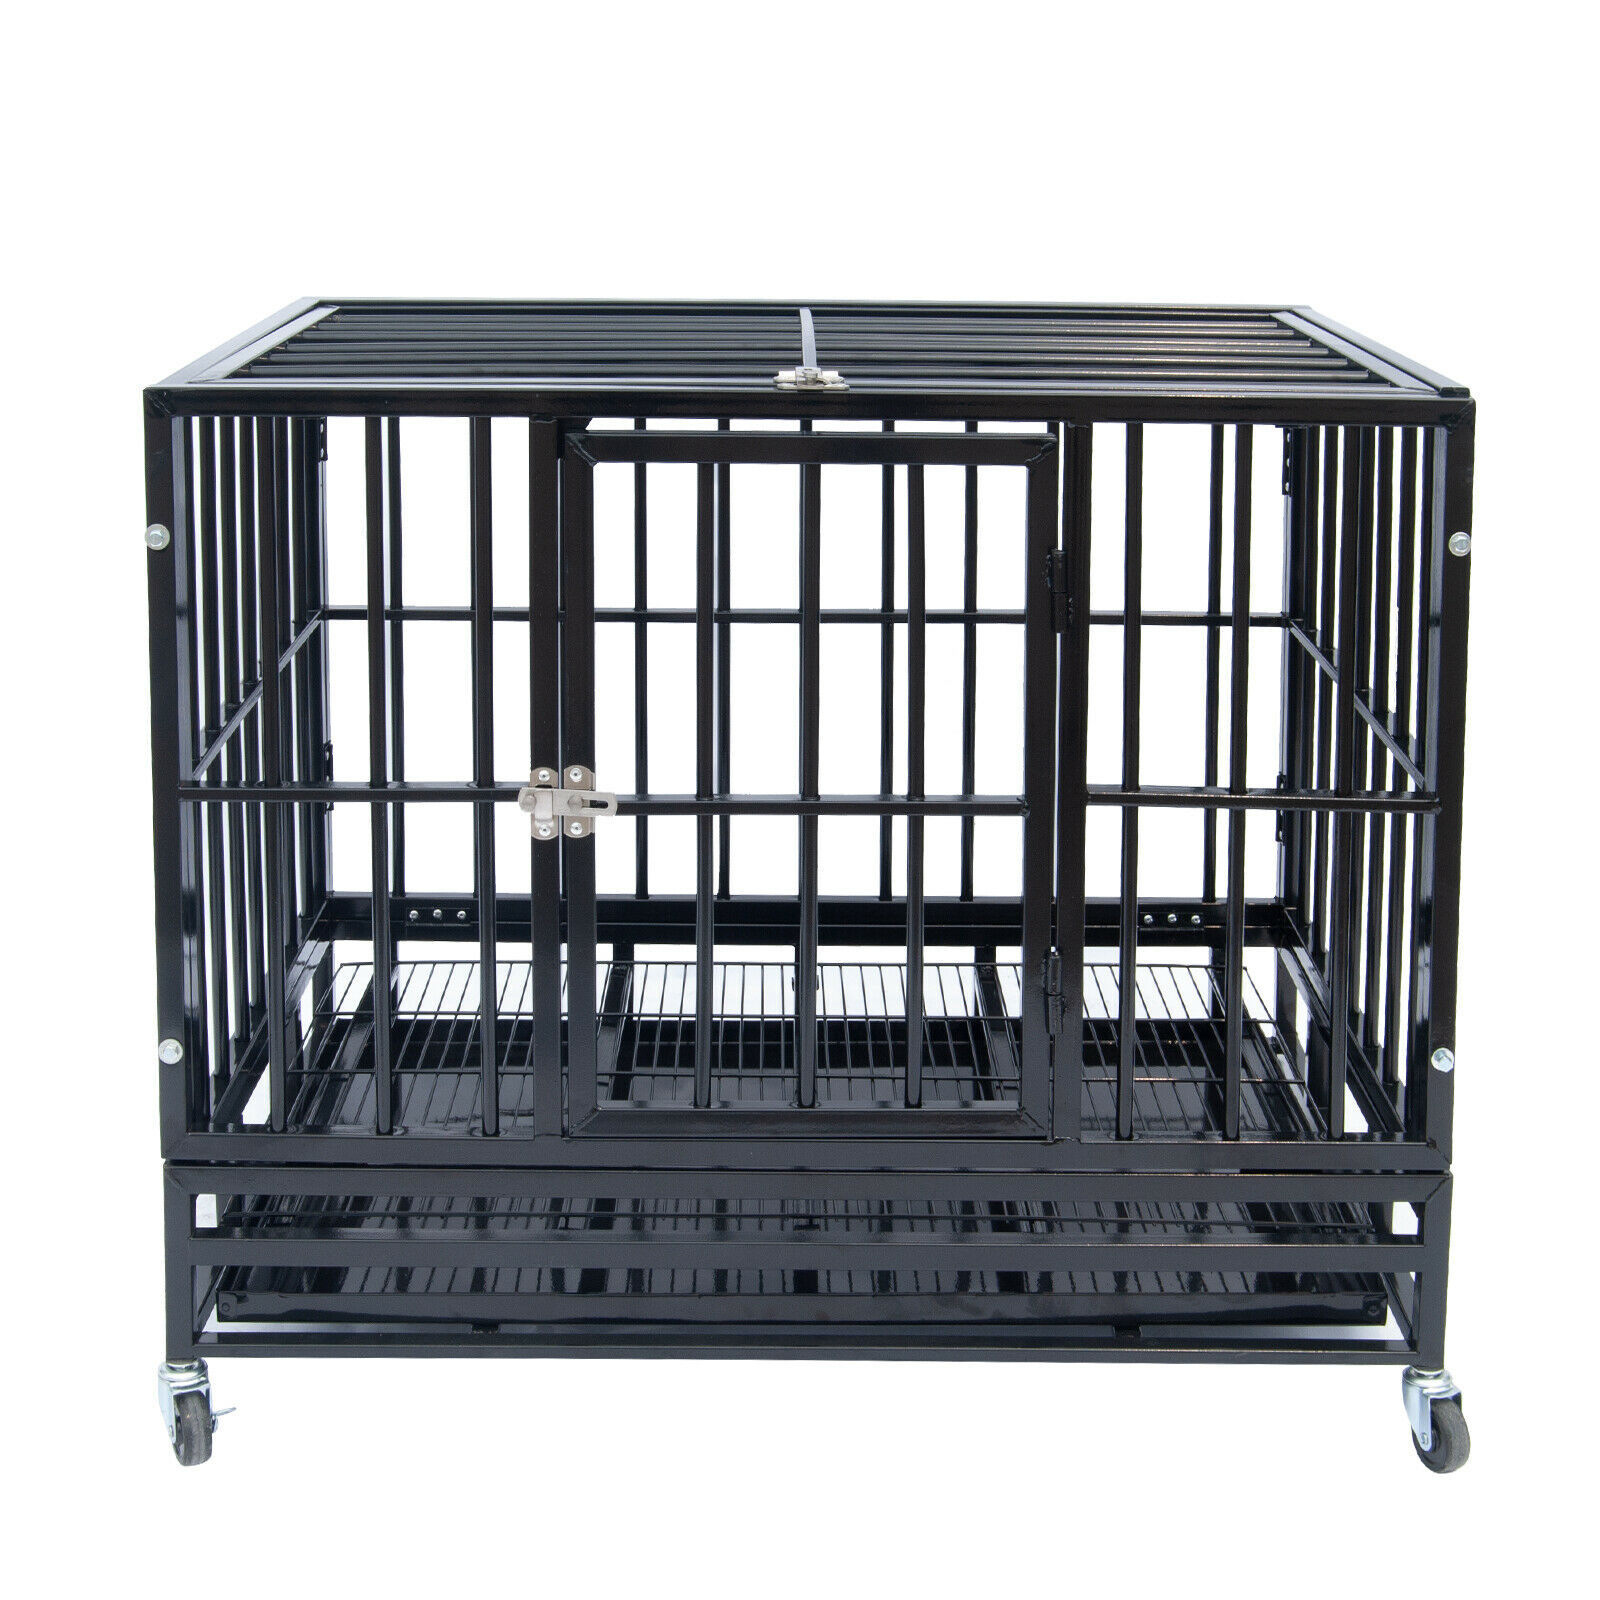 37" Heavy Duty Pet Dog Cage Strong Metal Crate Kennel Playpen W/ Wheels&tray